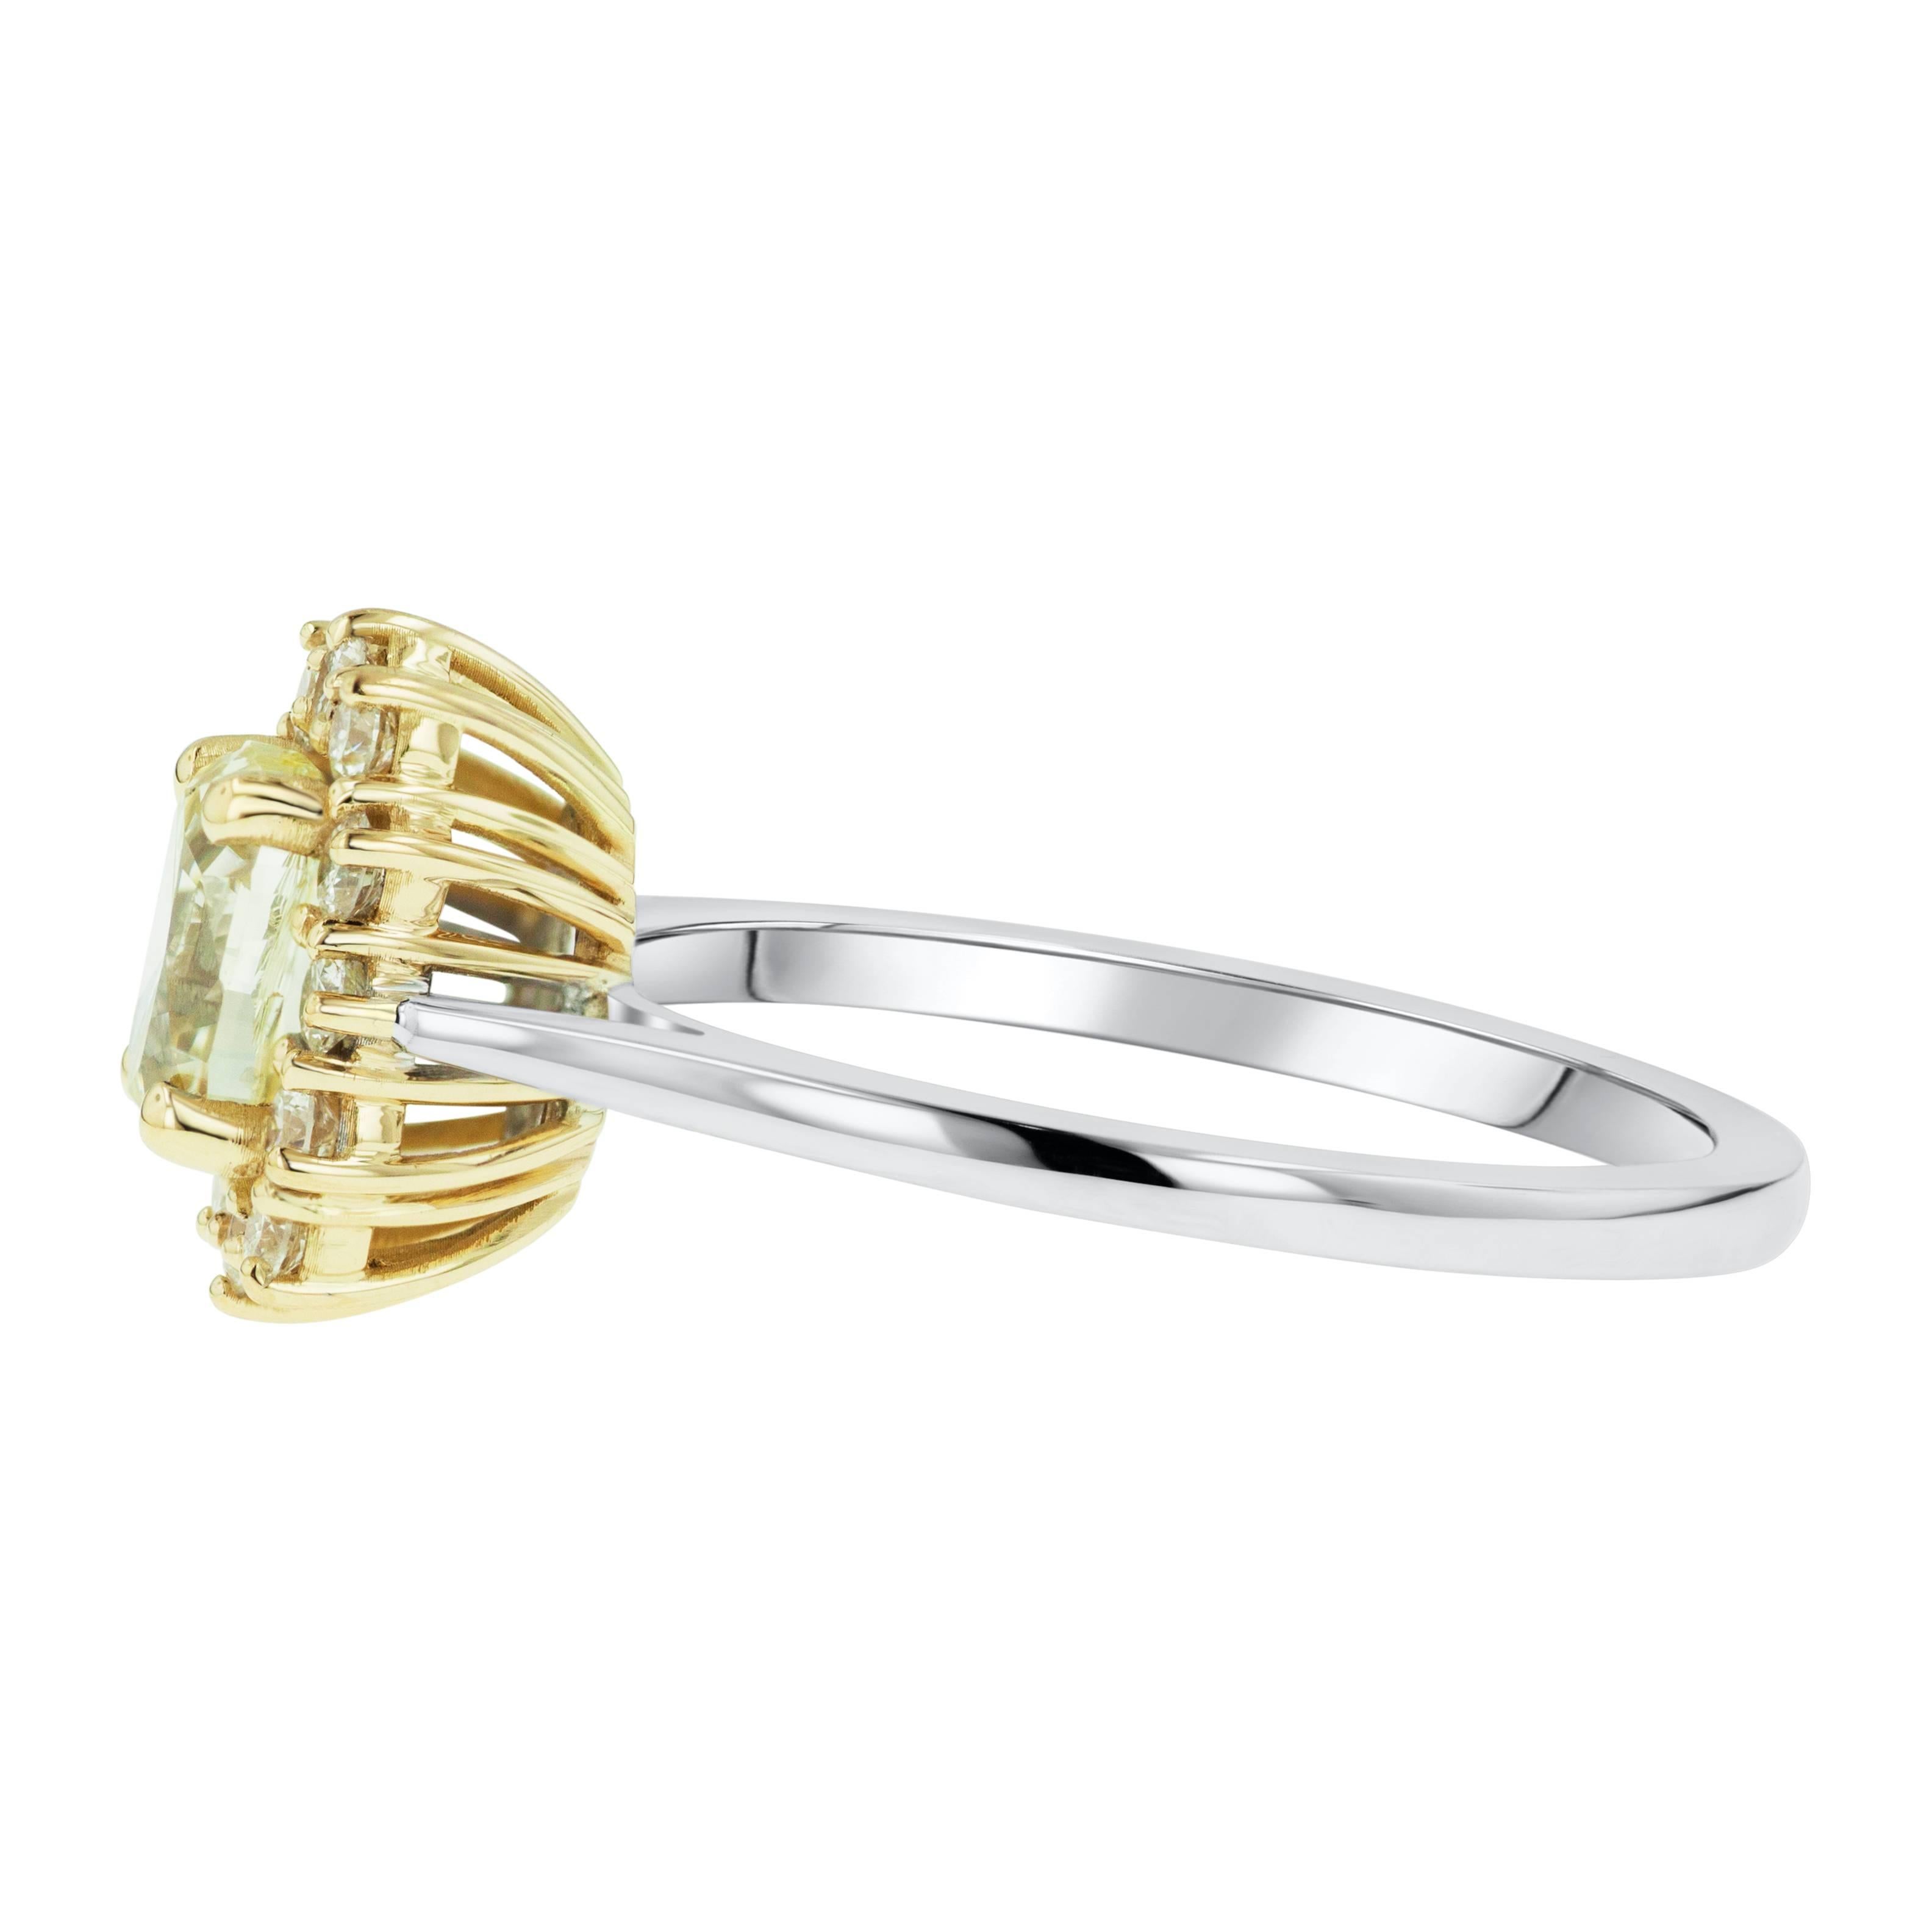 Beautiful Belle Époque inspired ring by Tears Undressed. This hand-made new jewelry piece is set in 14 karat white gold with an 18 karat yellow gold basket. The center stone is an exceptional 1.00 carat Fancy Yellow oval diamond encircled by 12